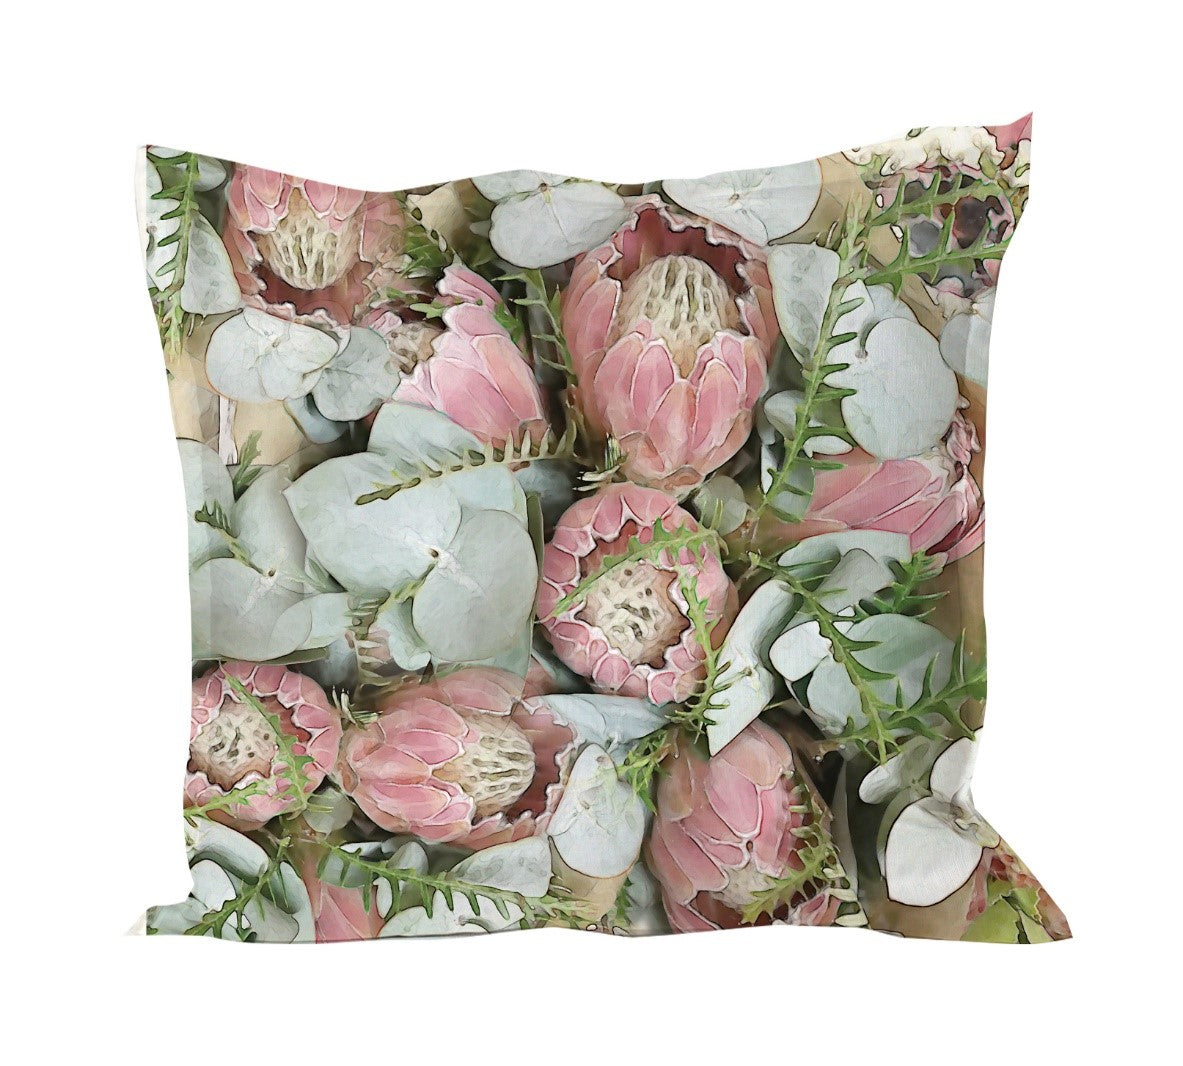 Cushion cover in Protea Soft Pink